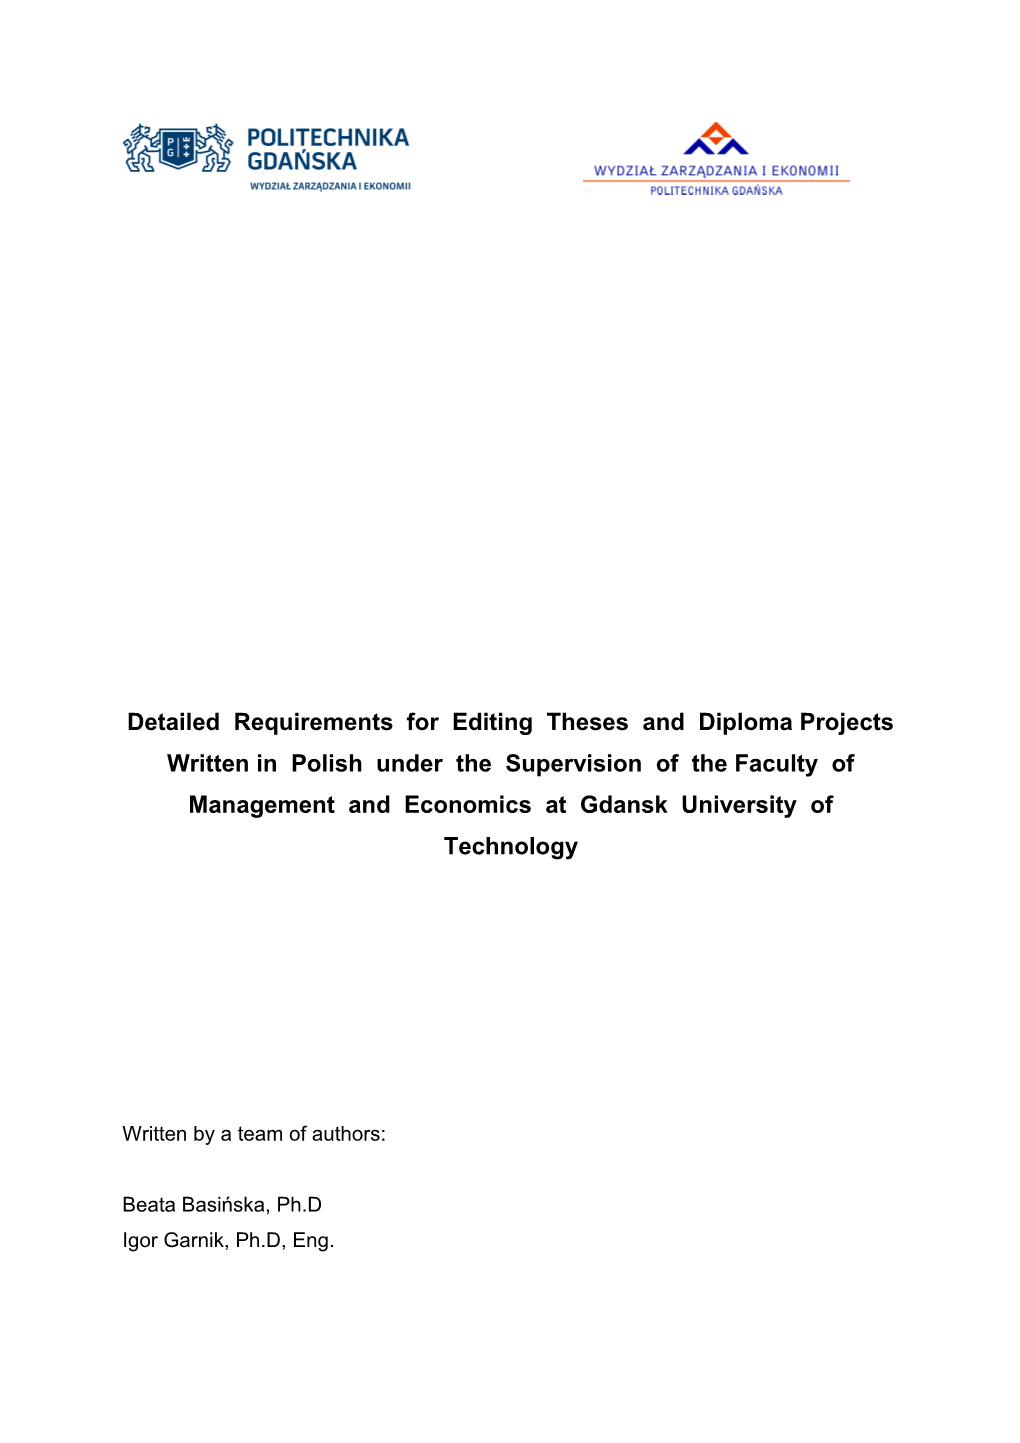 Detailed Requirements for Editing Theses and Diplomaprojects Written in Polish Under The